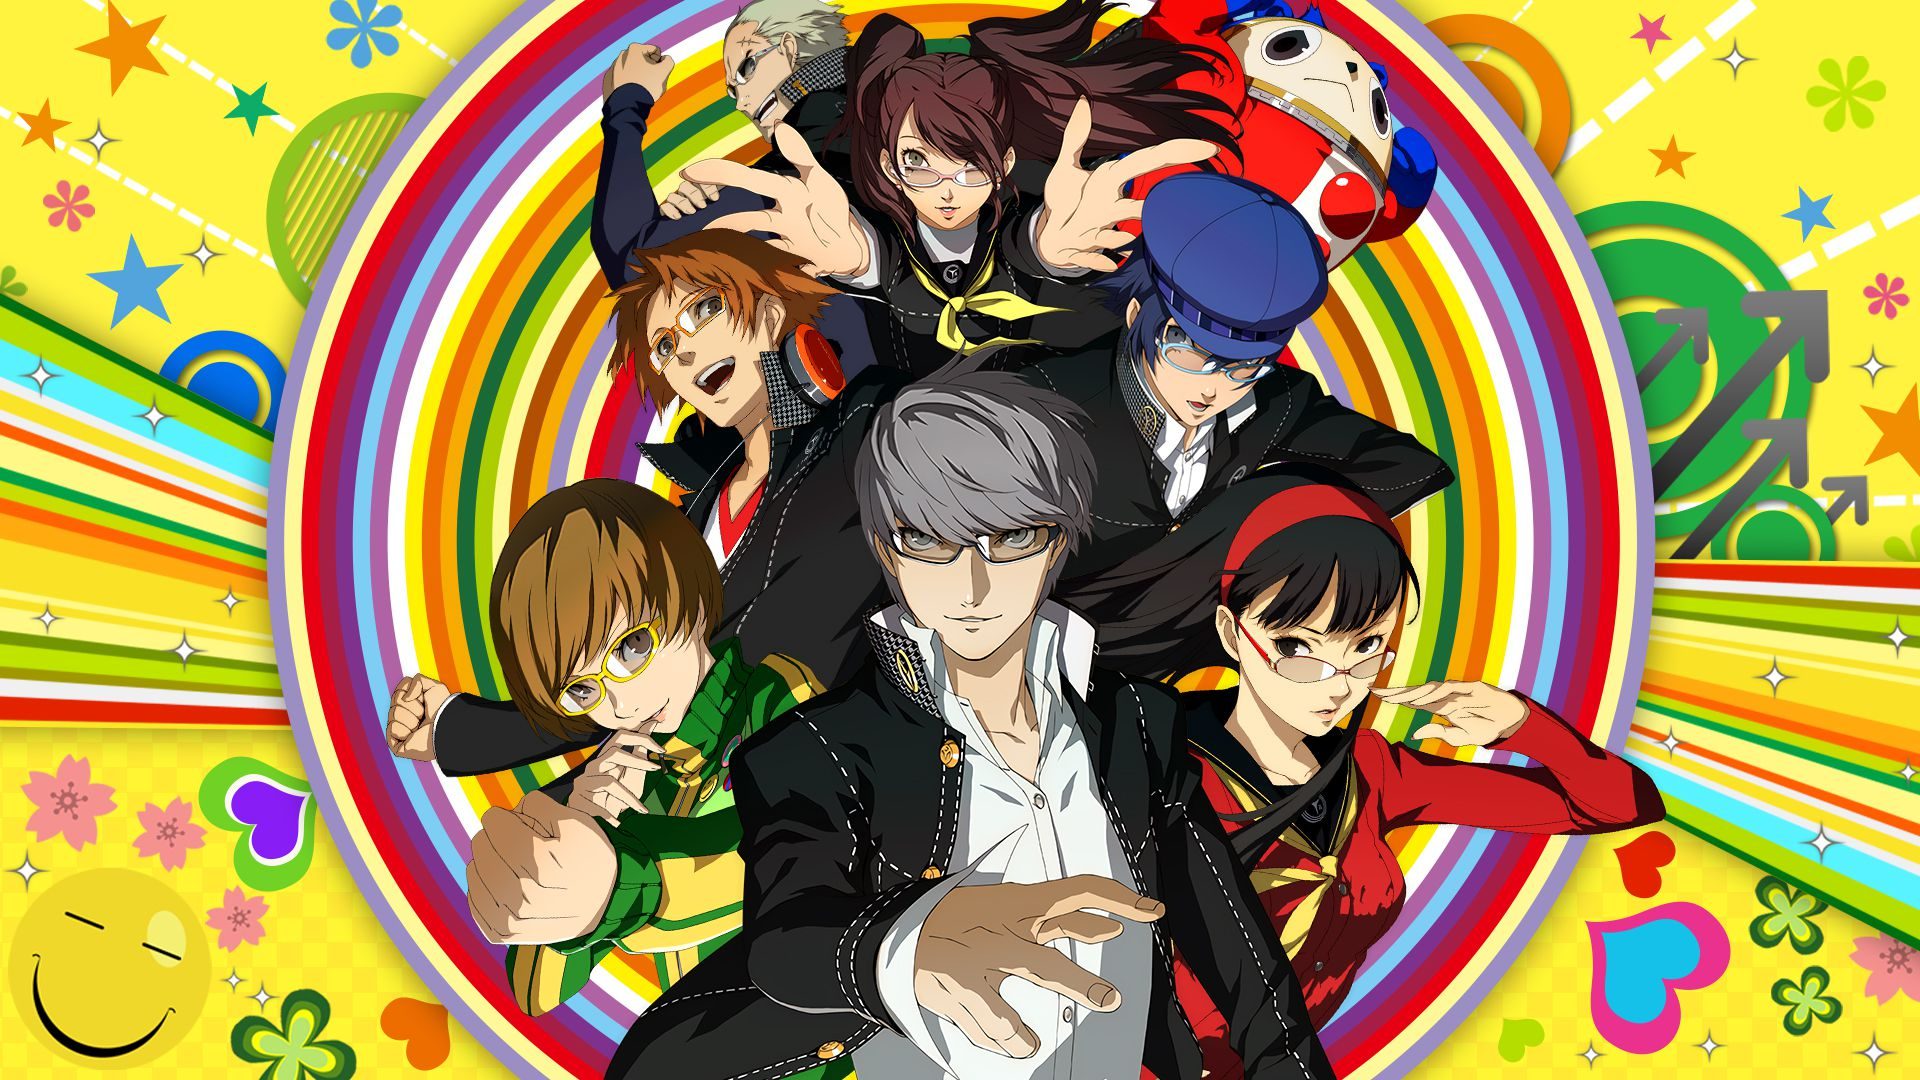 persona-4-golden-background-wallpaper-altar-of-gaming-8082959